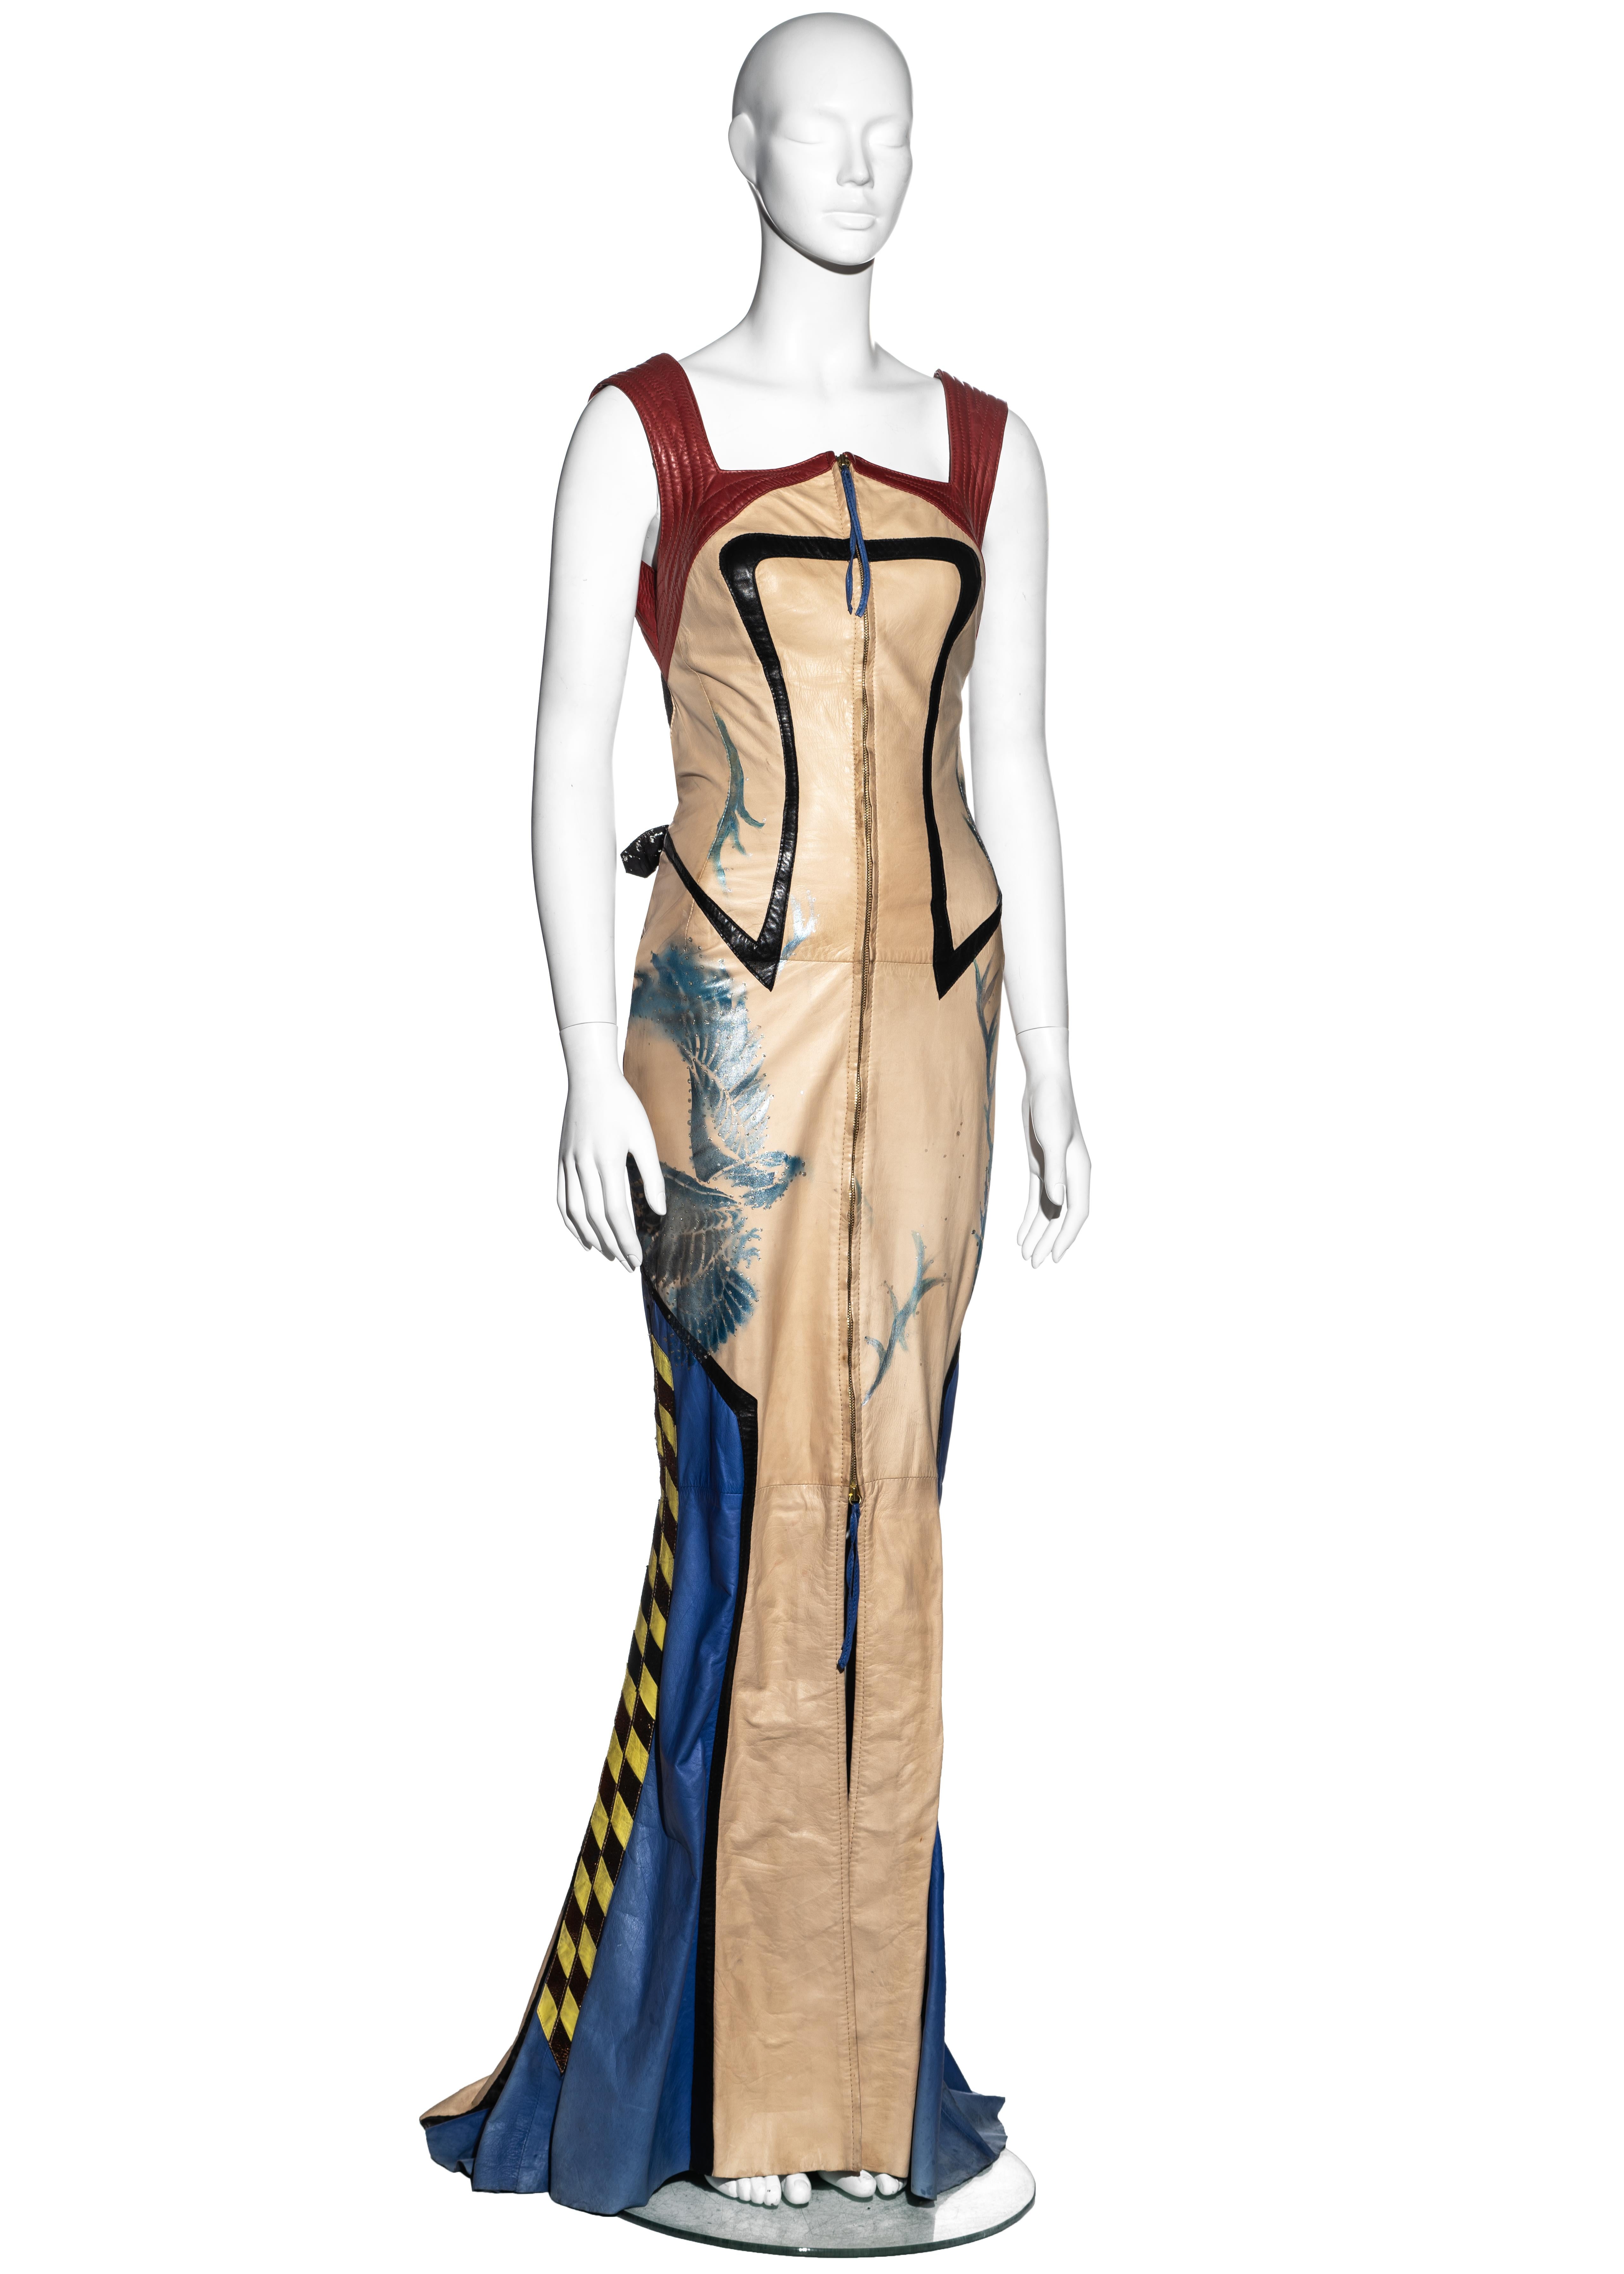 ▪ Roberto Cavalli hourglass leather maxi dress
▪ Cut and decorated like a motocross biker jacket 
▪ Red quilted leather panels at shoulders and hips 
▪ Metallic hand painted motifs 
▪ leather lace up fastening at centre back 
▪ Double ended zipper